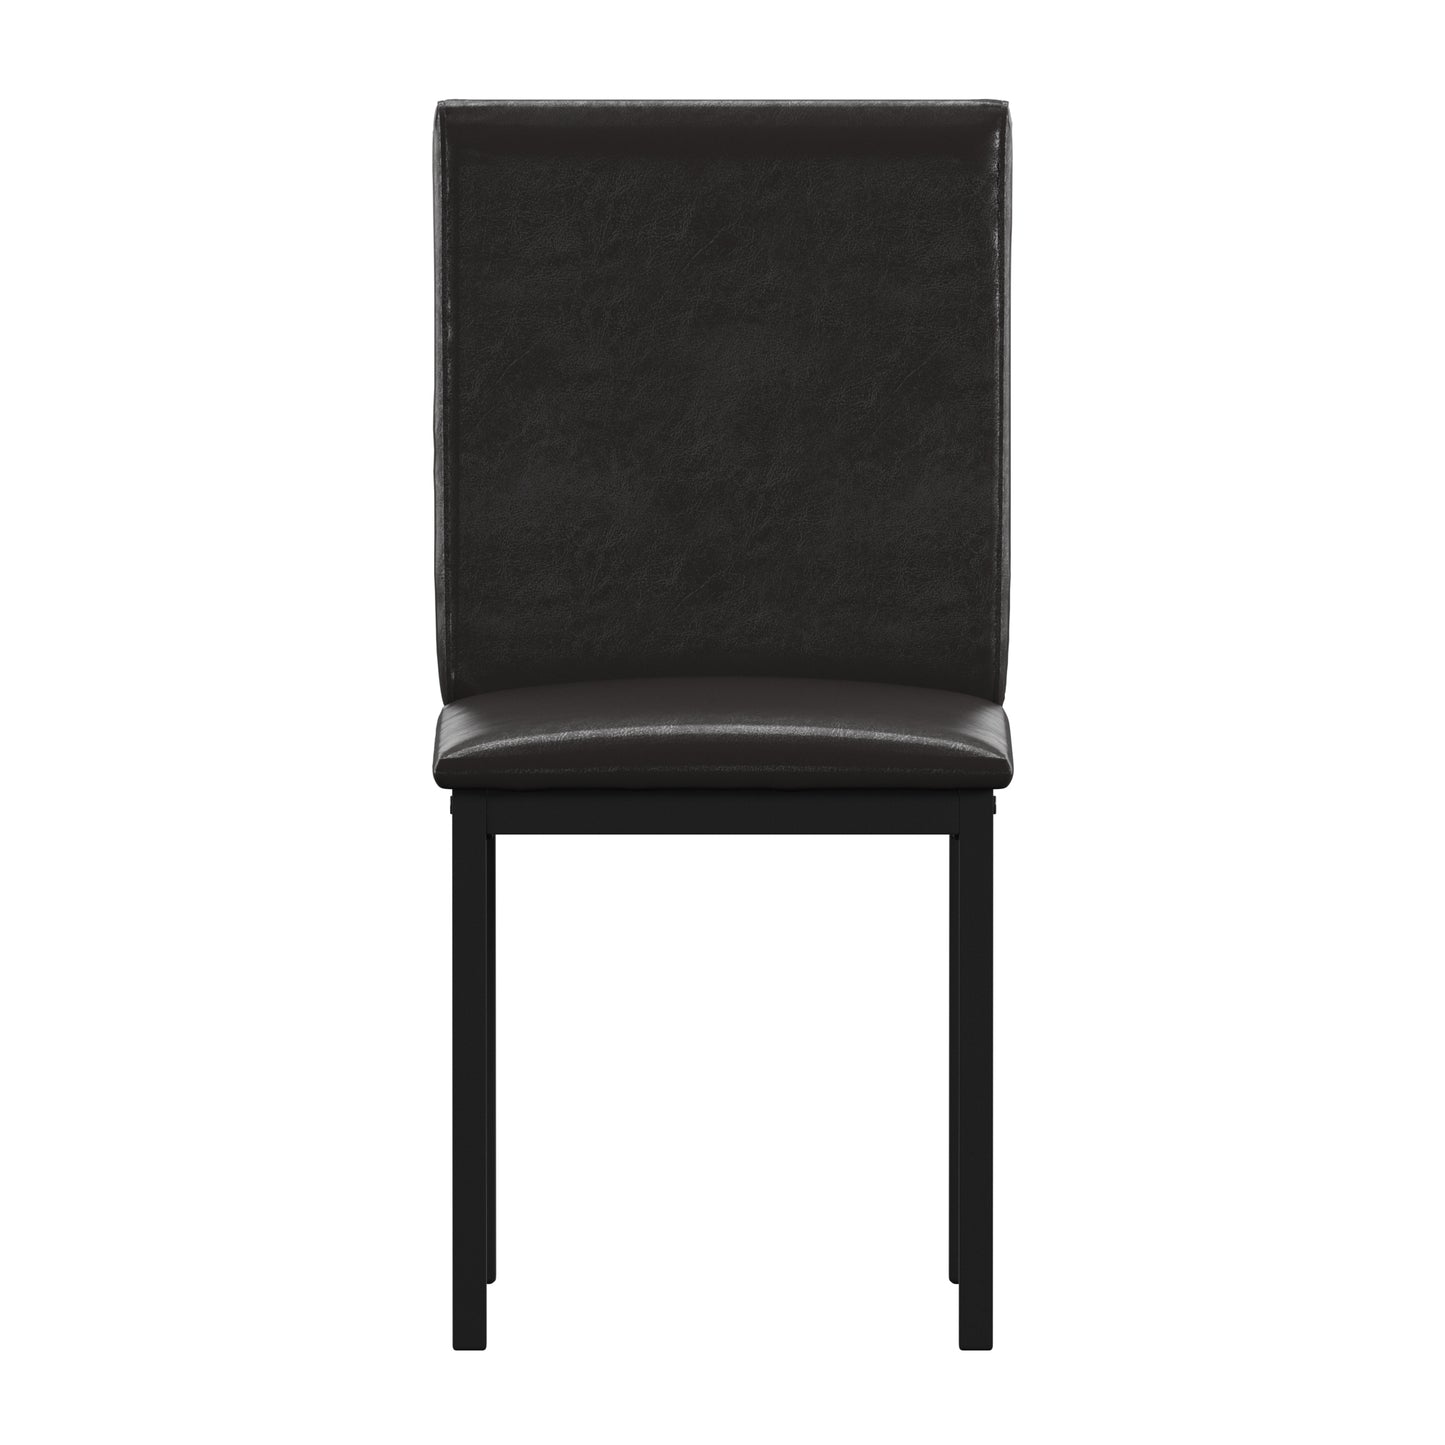 Metal Upholstered Dining Chairs - Dark Brown Faux Leather, Set of 2